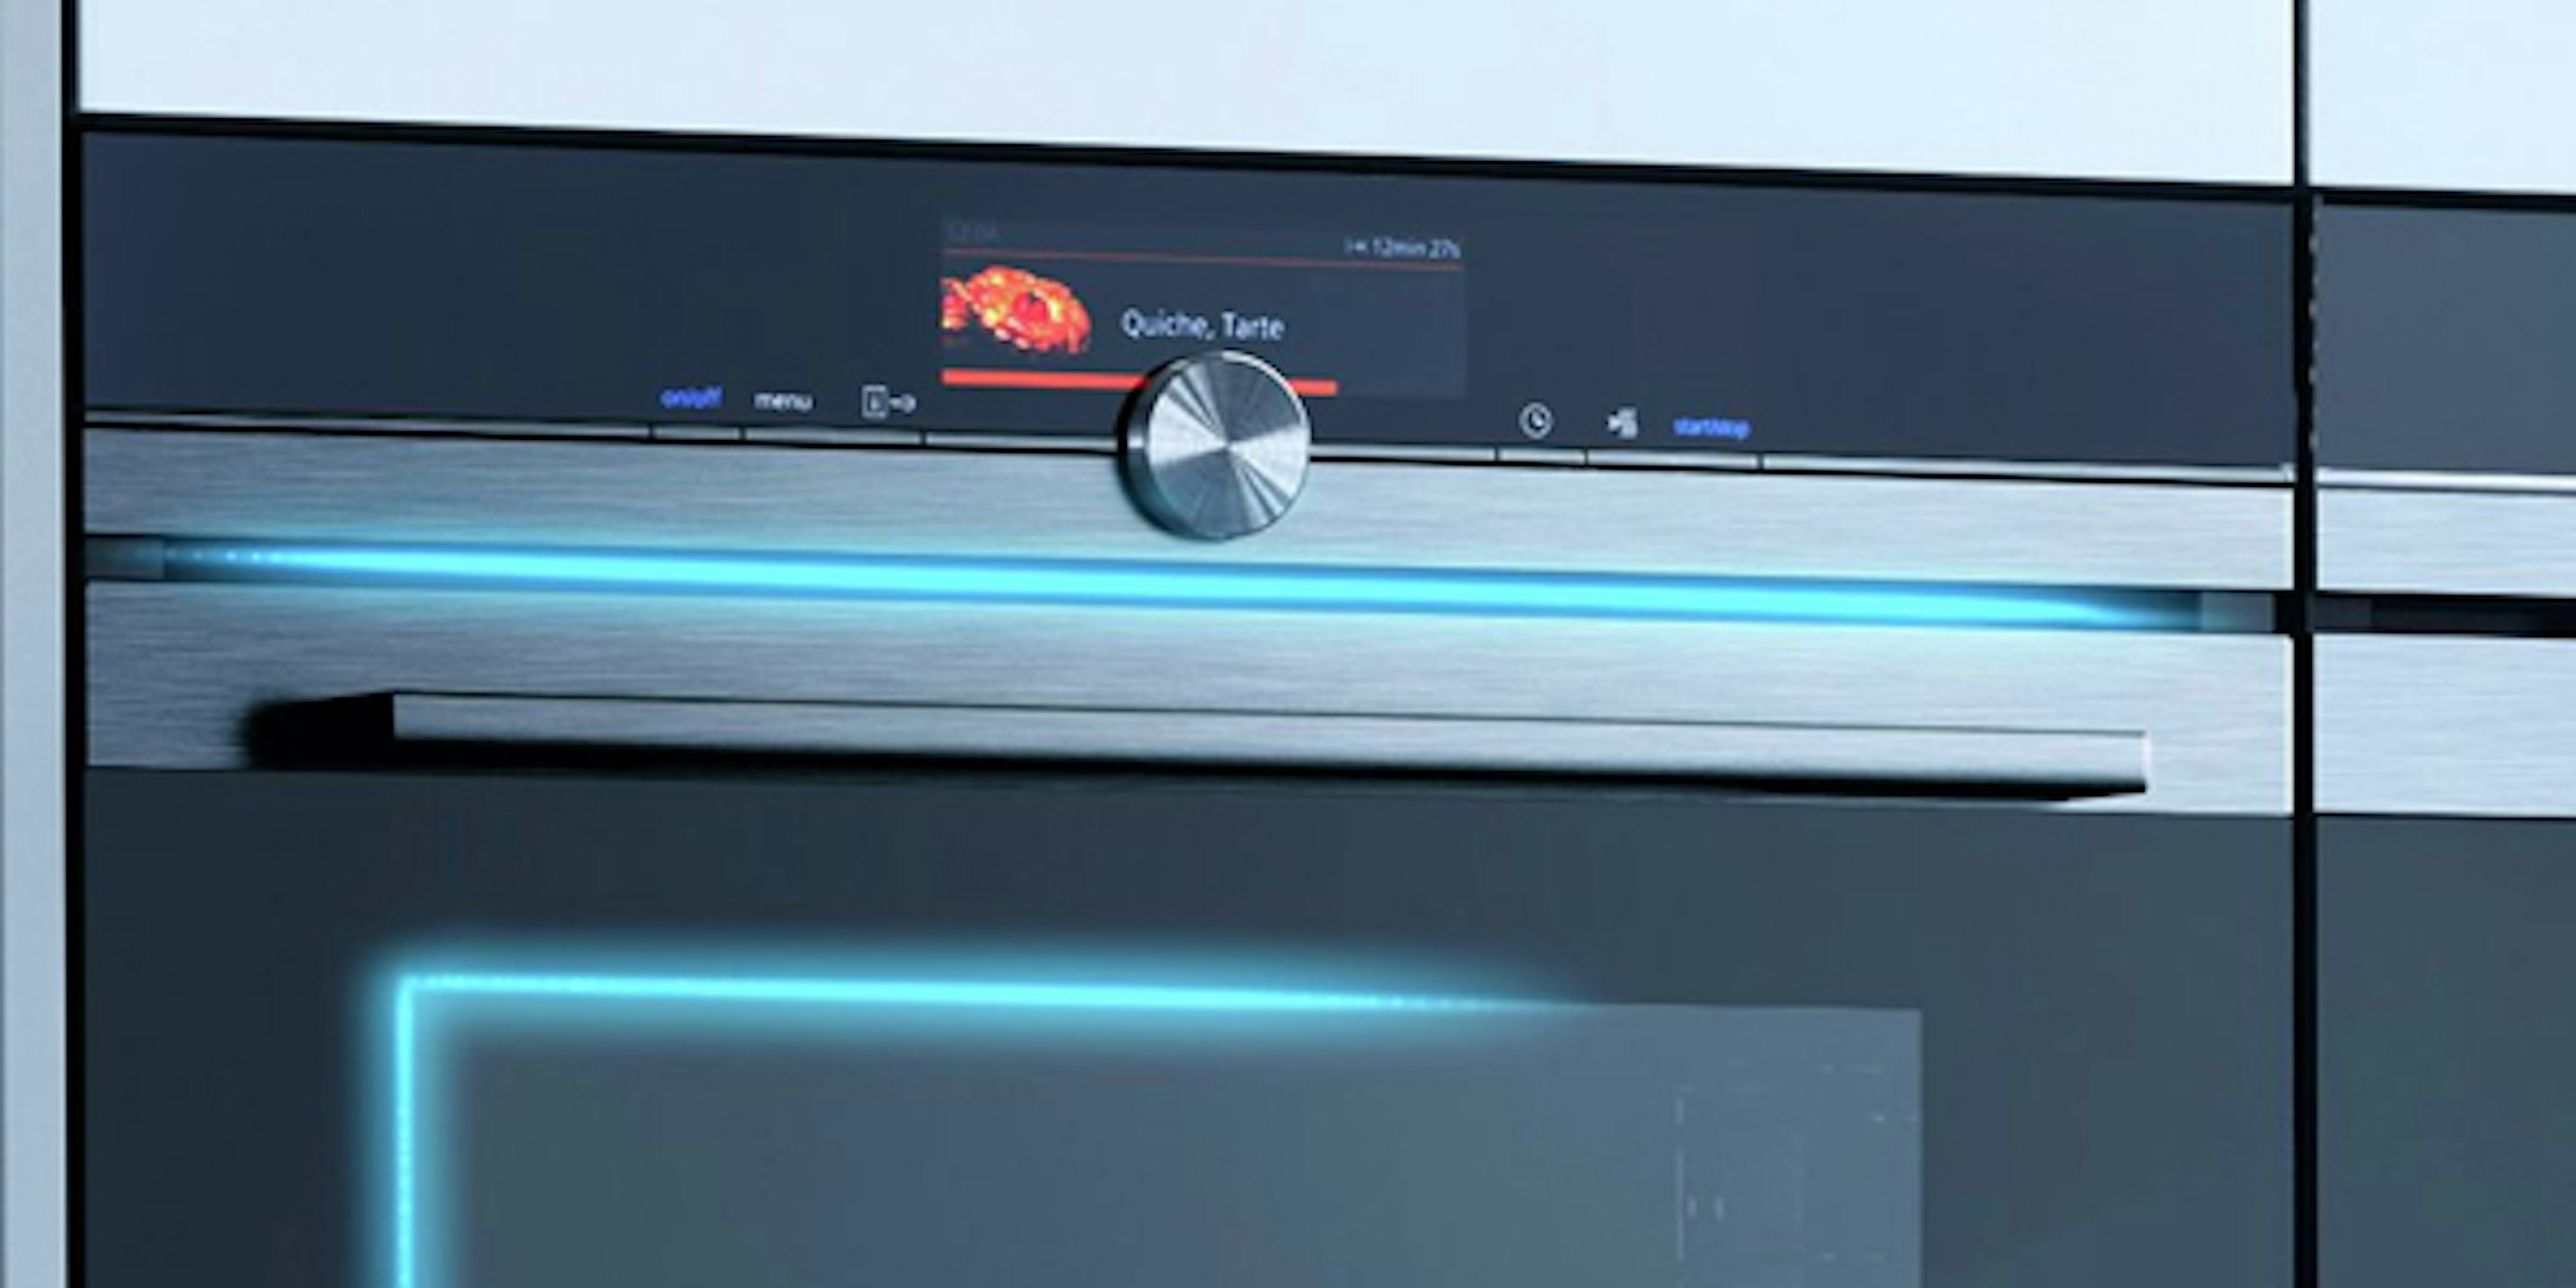 Siemens Home Connect oven